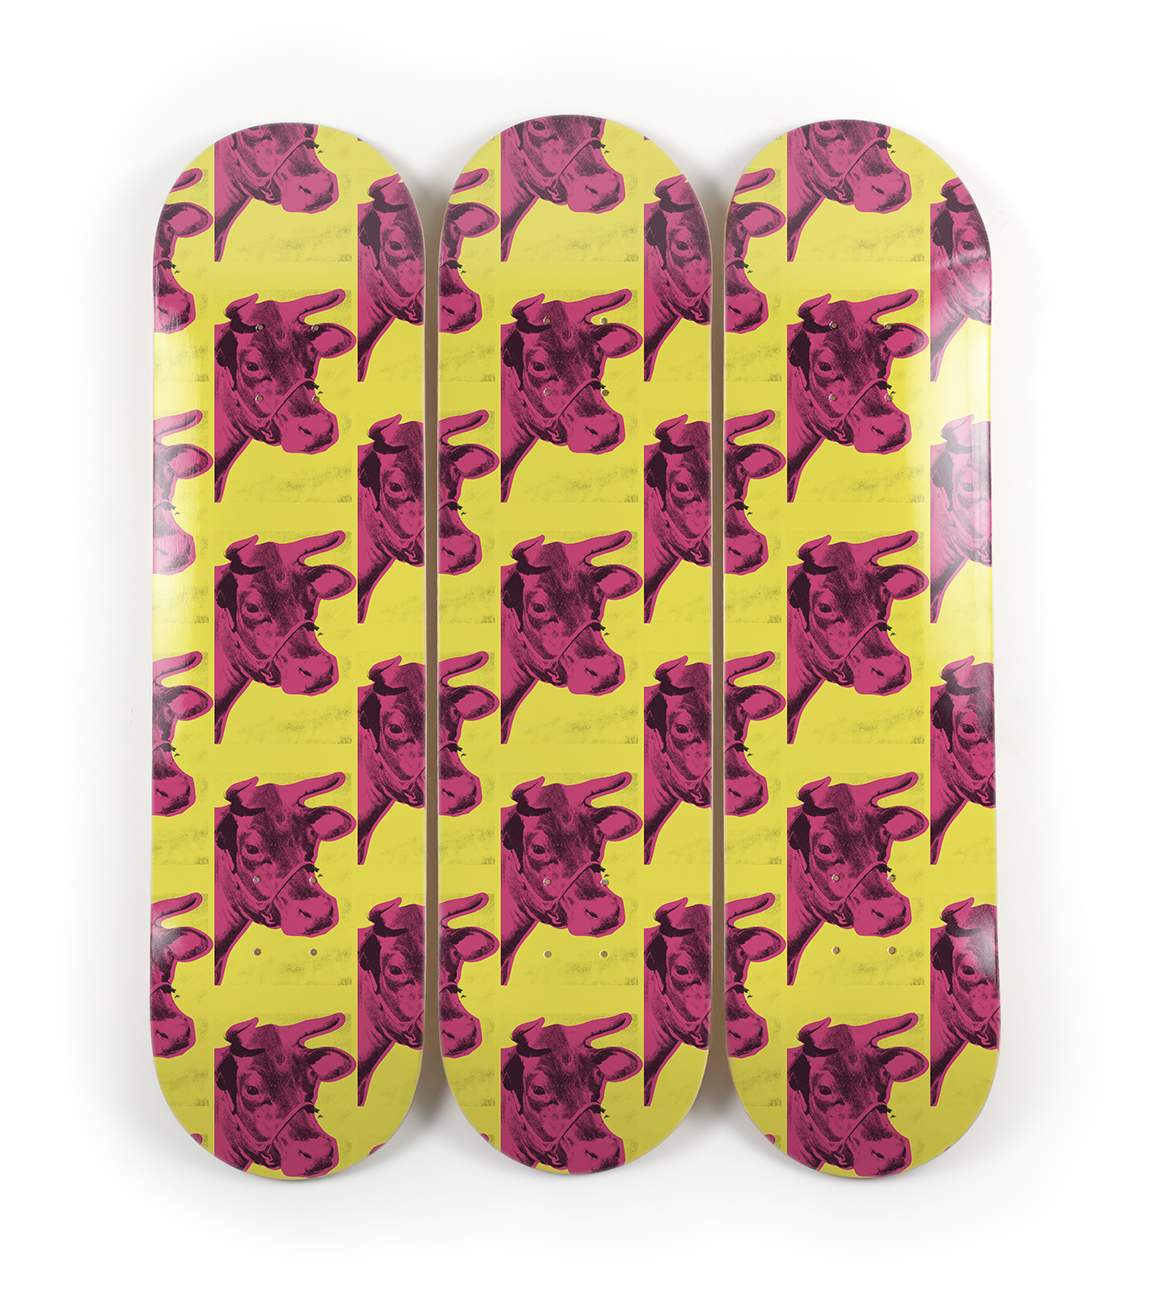 Cow (pink & yellow) Triptych